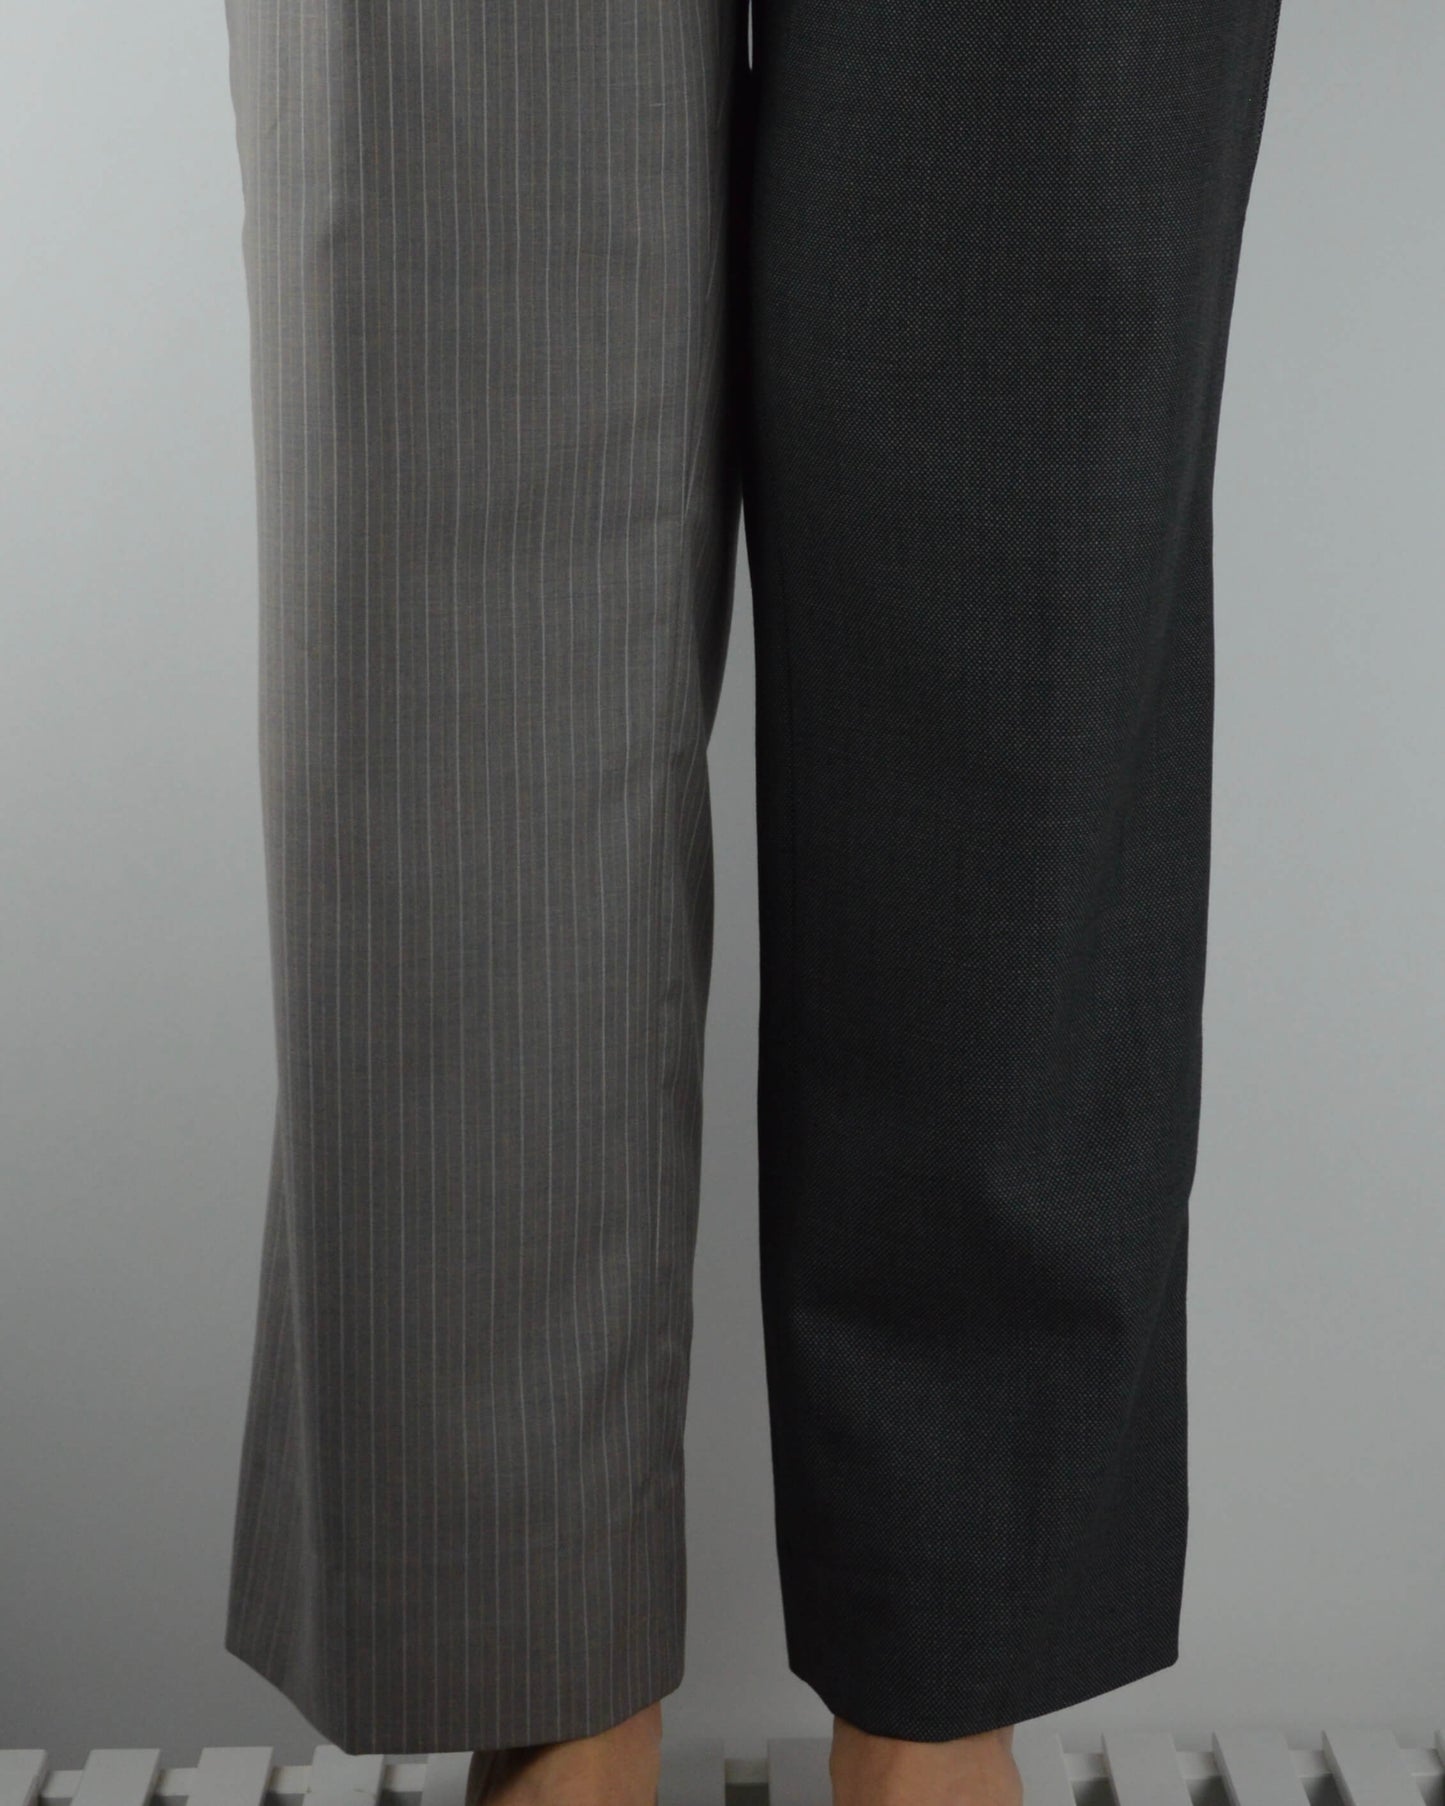 DUO Suit - Silver (XS/M)